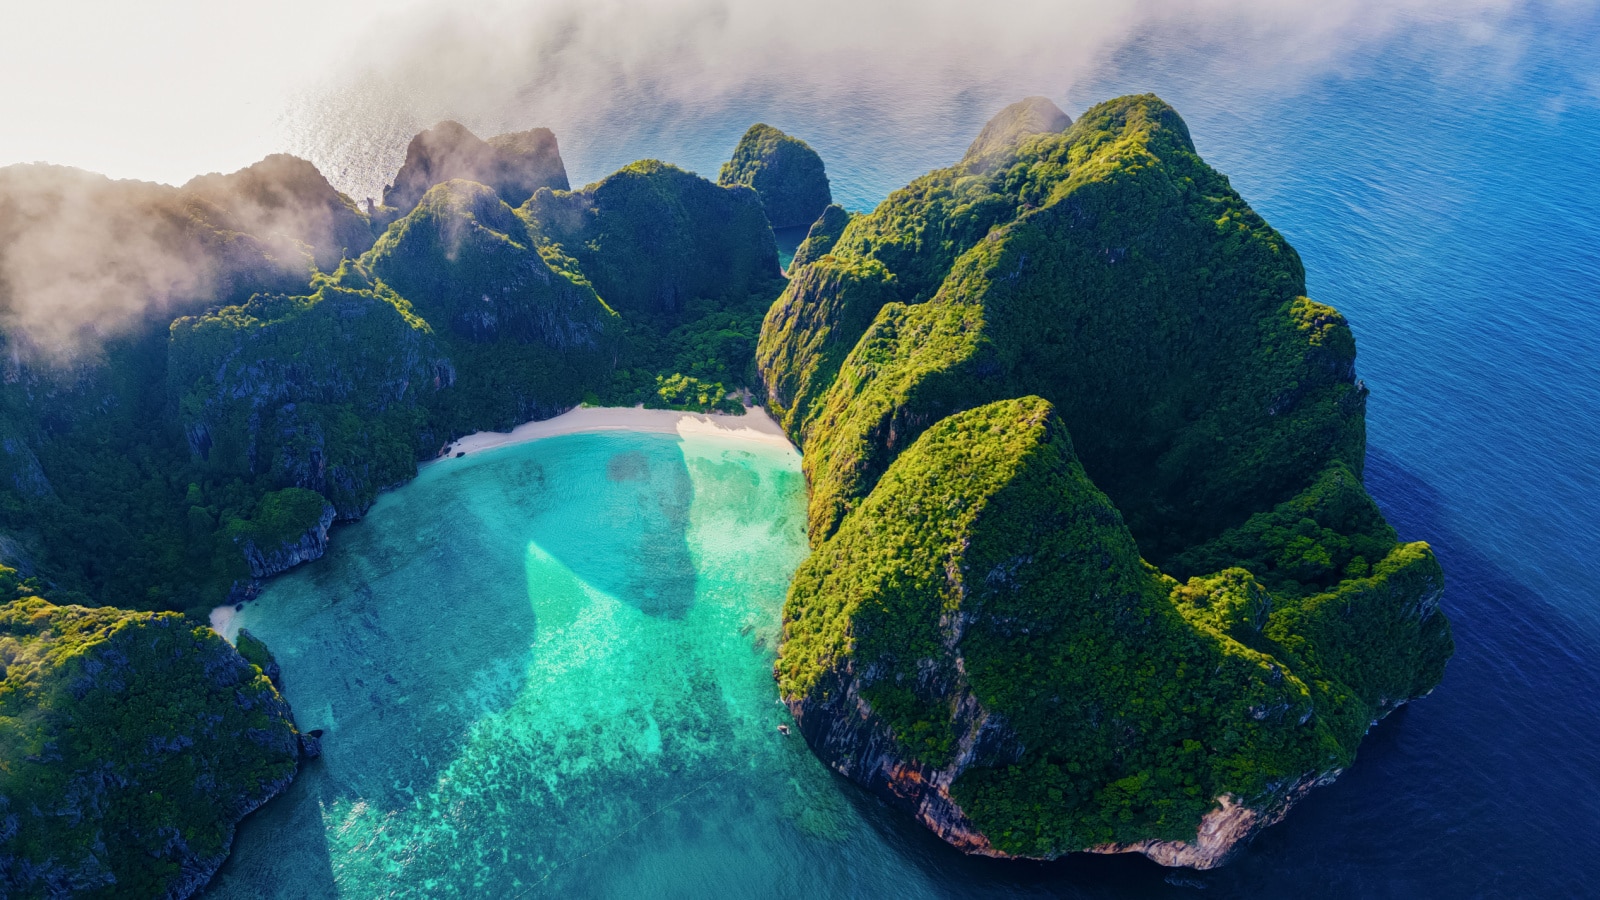 Maya Bay Koh Phi Phi Thailand, Turquoise clear water Thailand Koh Pi Pi, Scenic aerial view of Koh Phi Phi Island in Thailand drone view